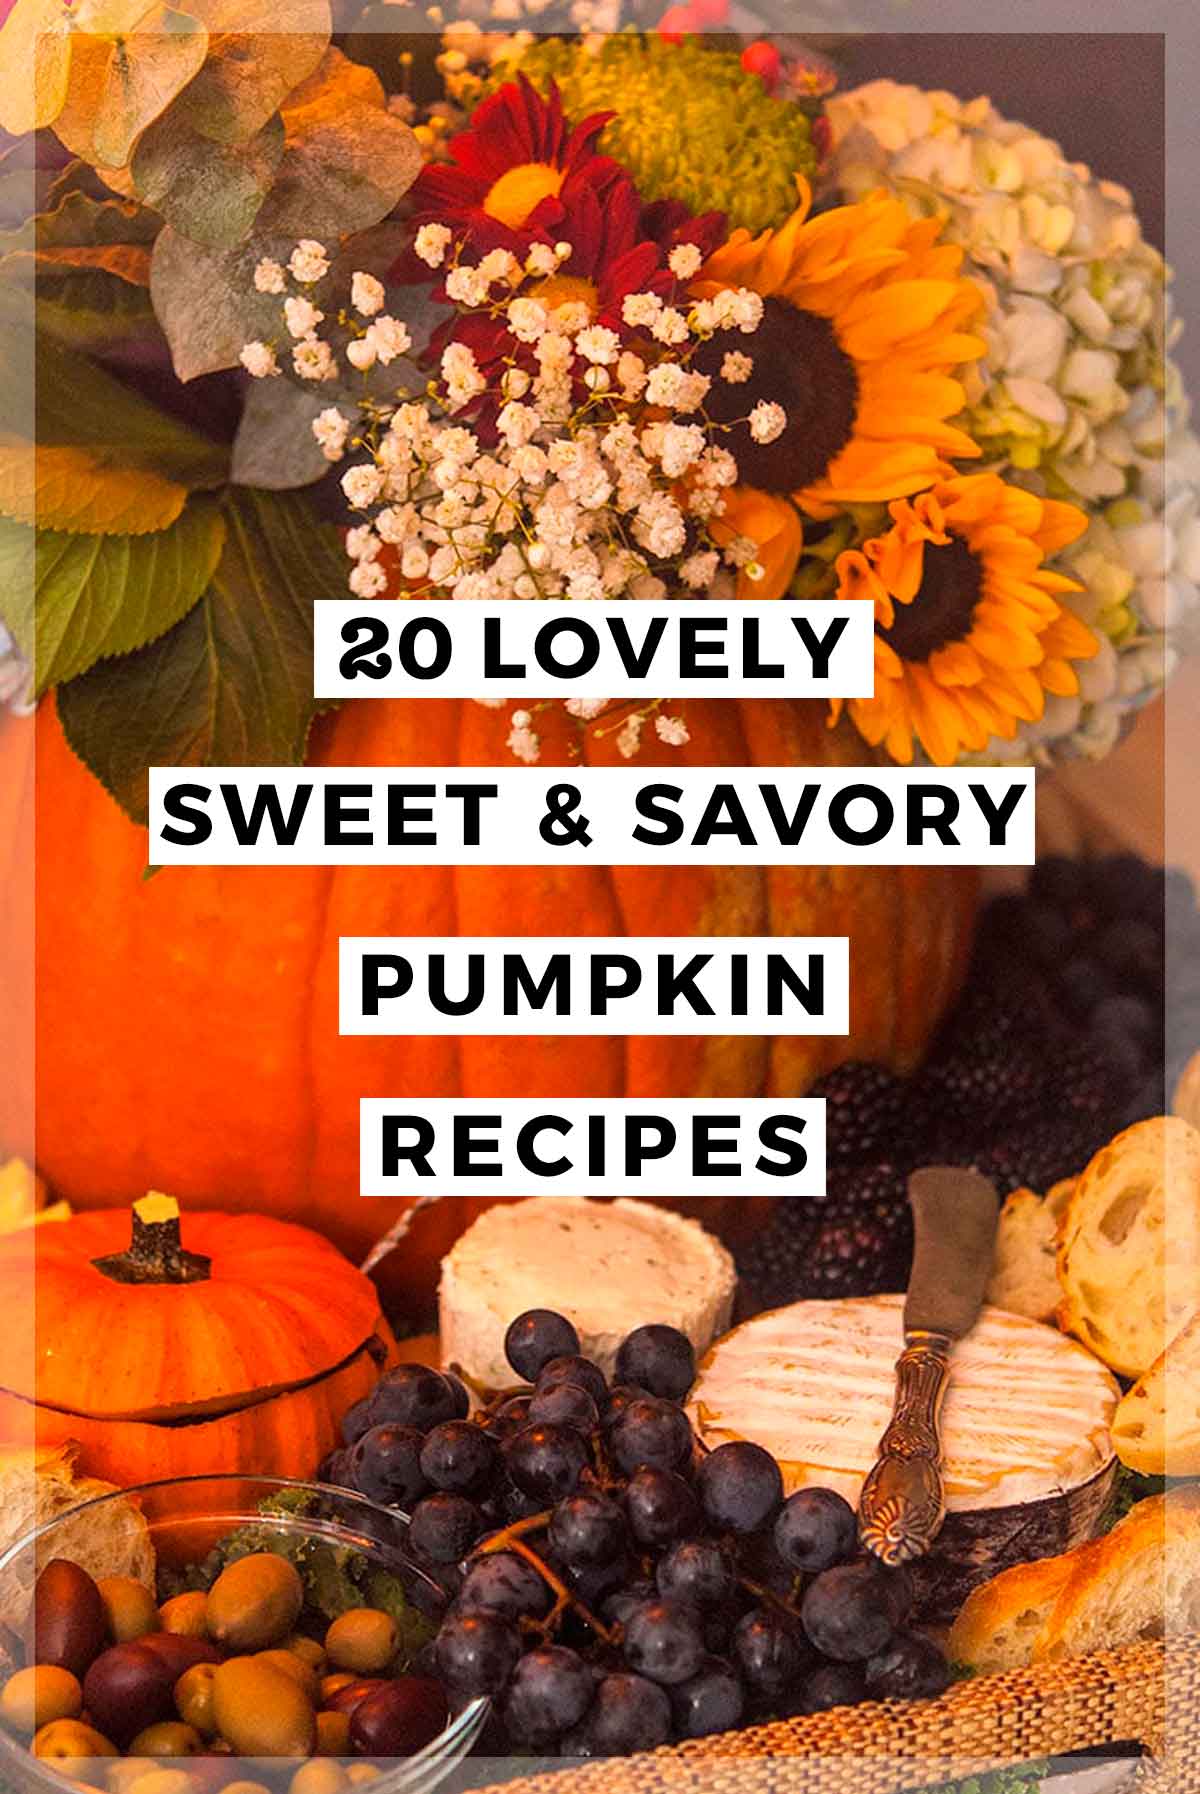 A pumpkin with flowers surrounded by snacks with a title that says "20 Lovely Sweet & Savory Pumpkin Recipes."